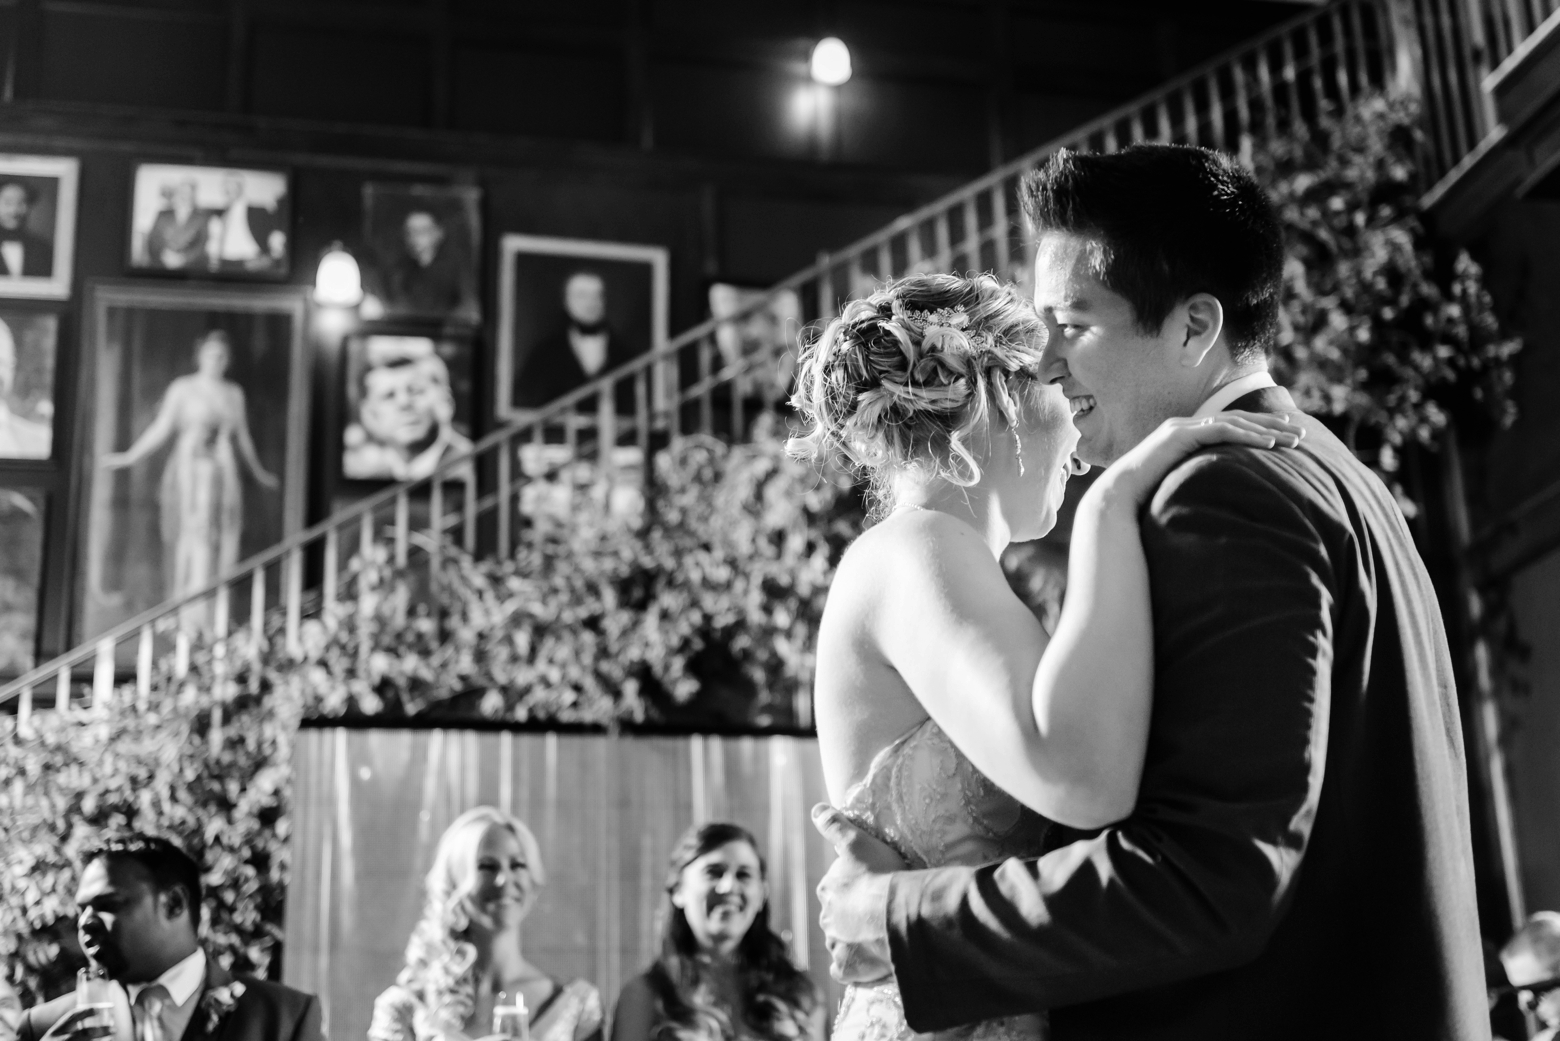 Bride and Groom dance together during their reception in classic black and white photography